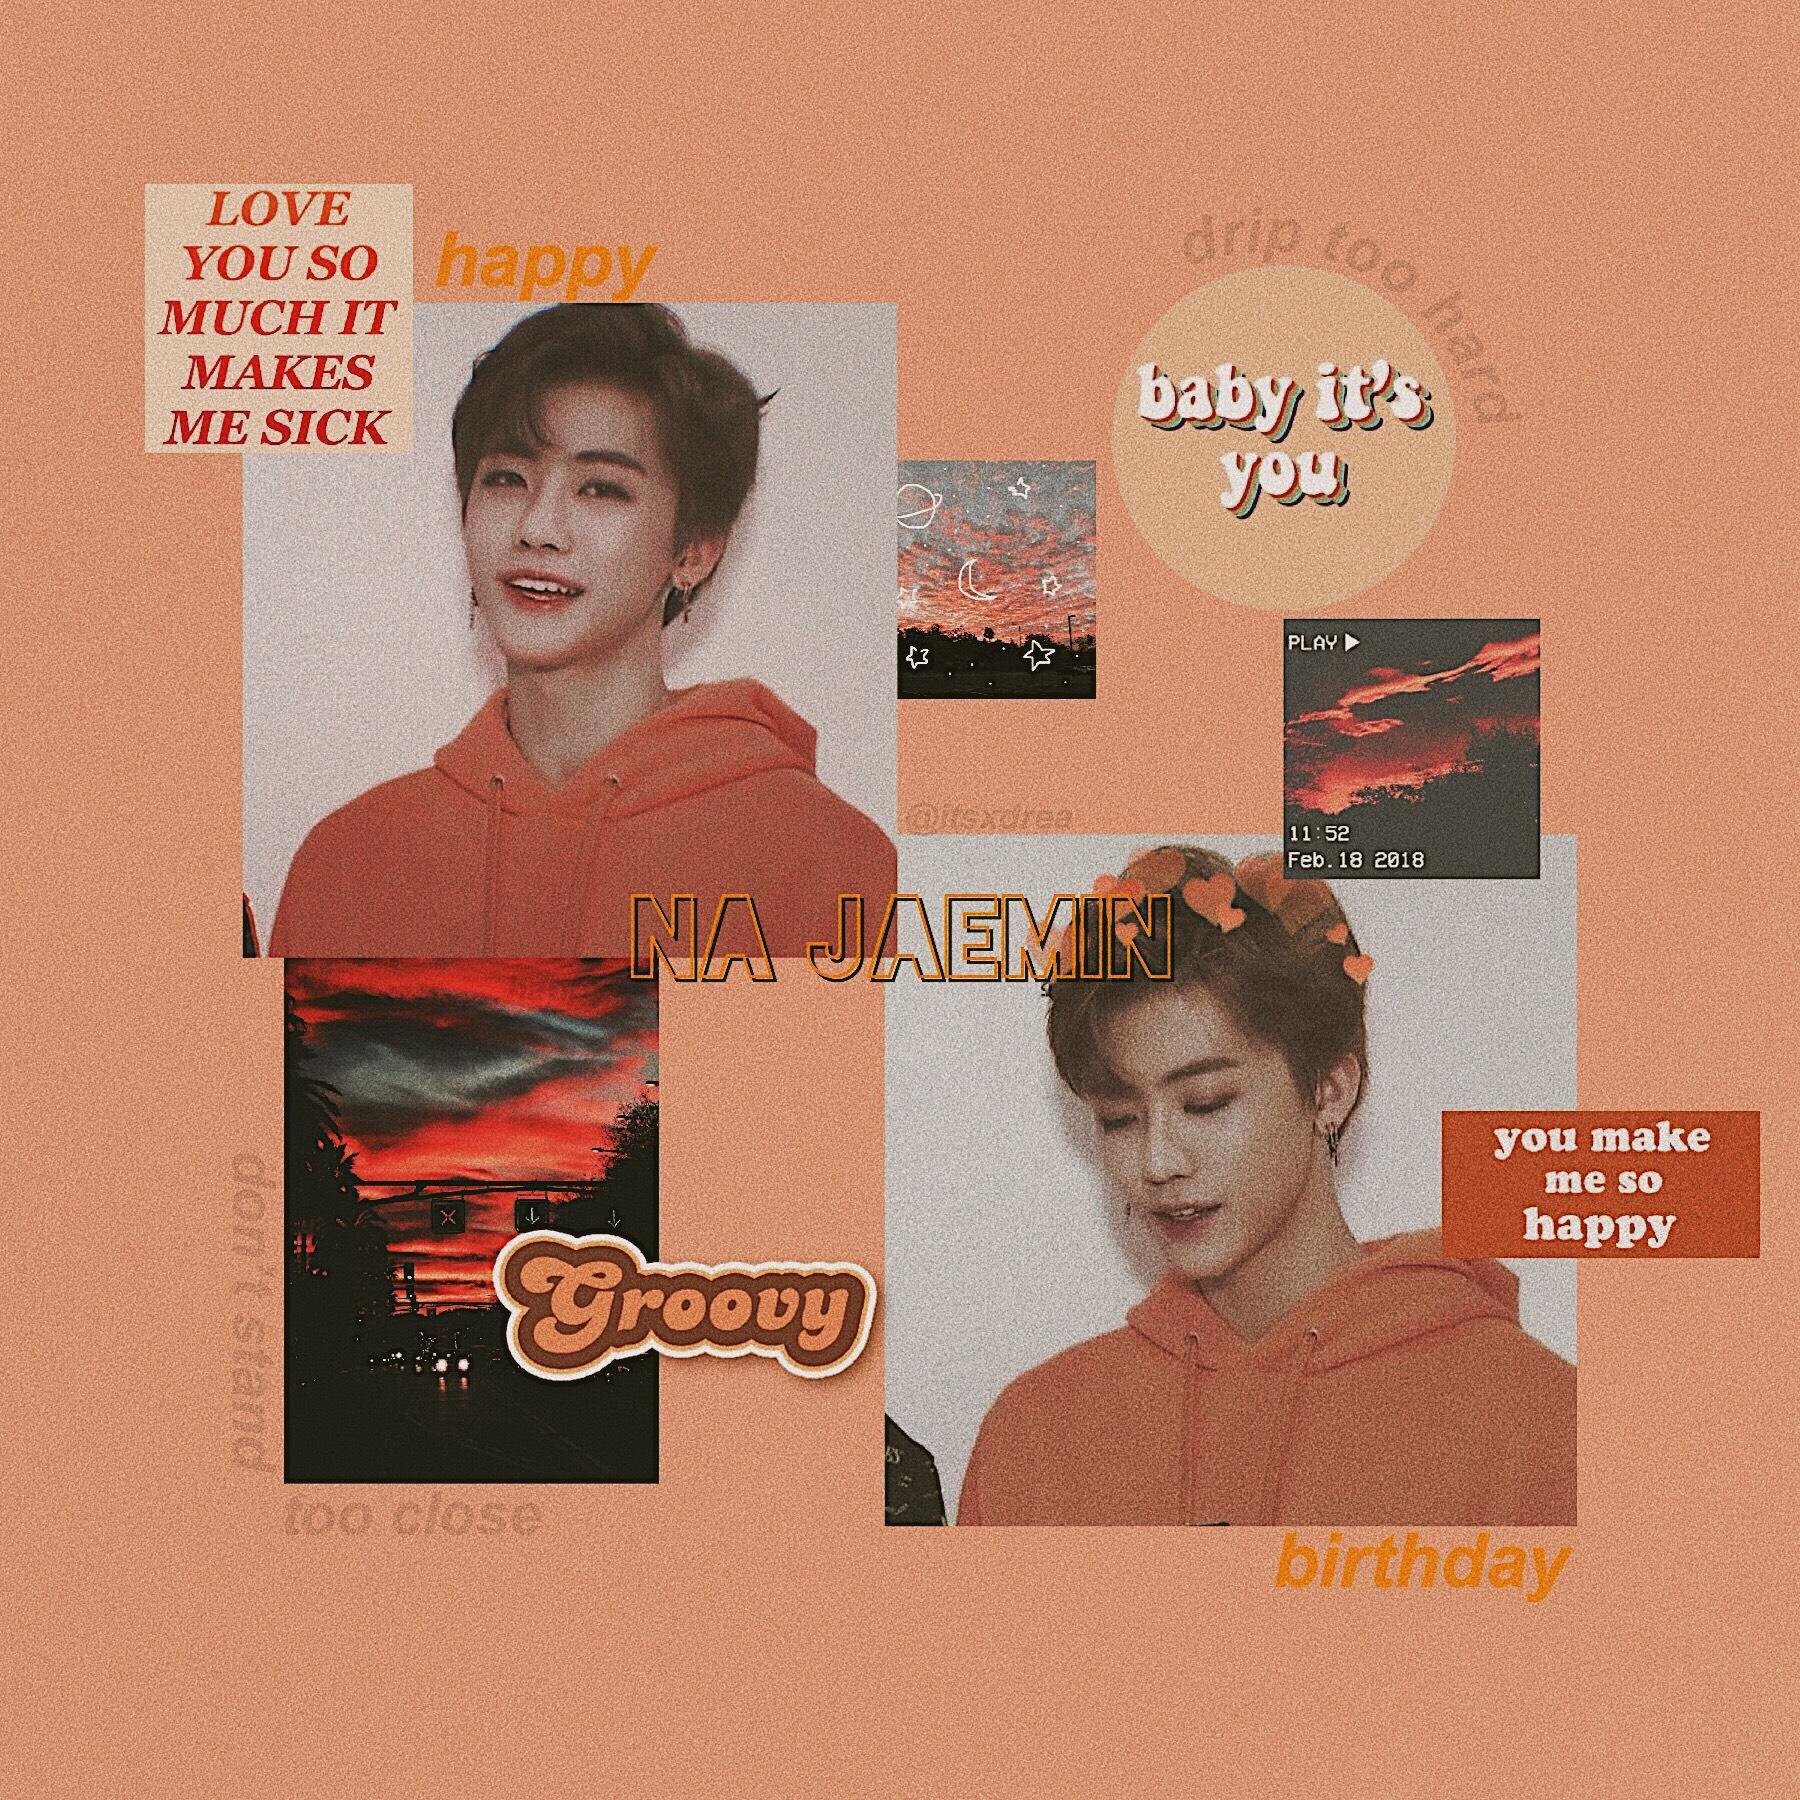 🍑
• na jaemin // nct •
> ik i’m late, but HAPPY BIRTHDAY TO MY BB (i have too many LOL) NCTIZENS LOVE YOU NANA <
GUYS SCHOOL IS TMRW AND I CANT PROCESS THE FACT THAT SUMMER IS ALREADY OVER
*also check the remixes*